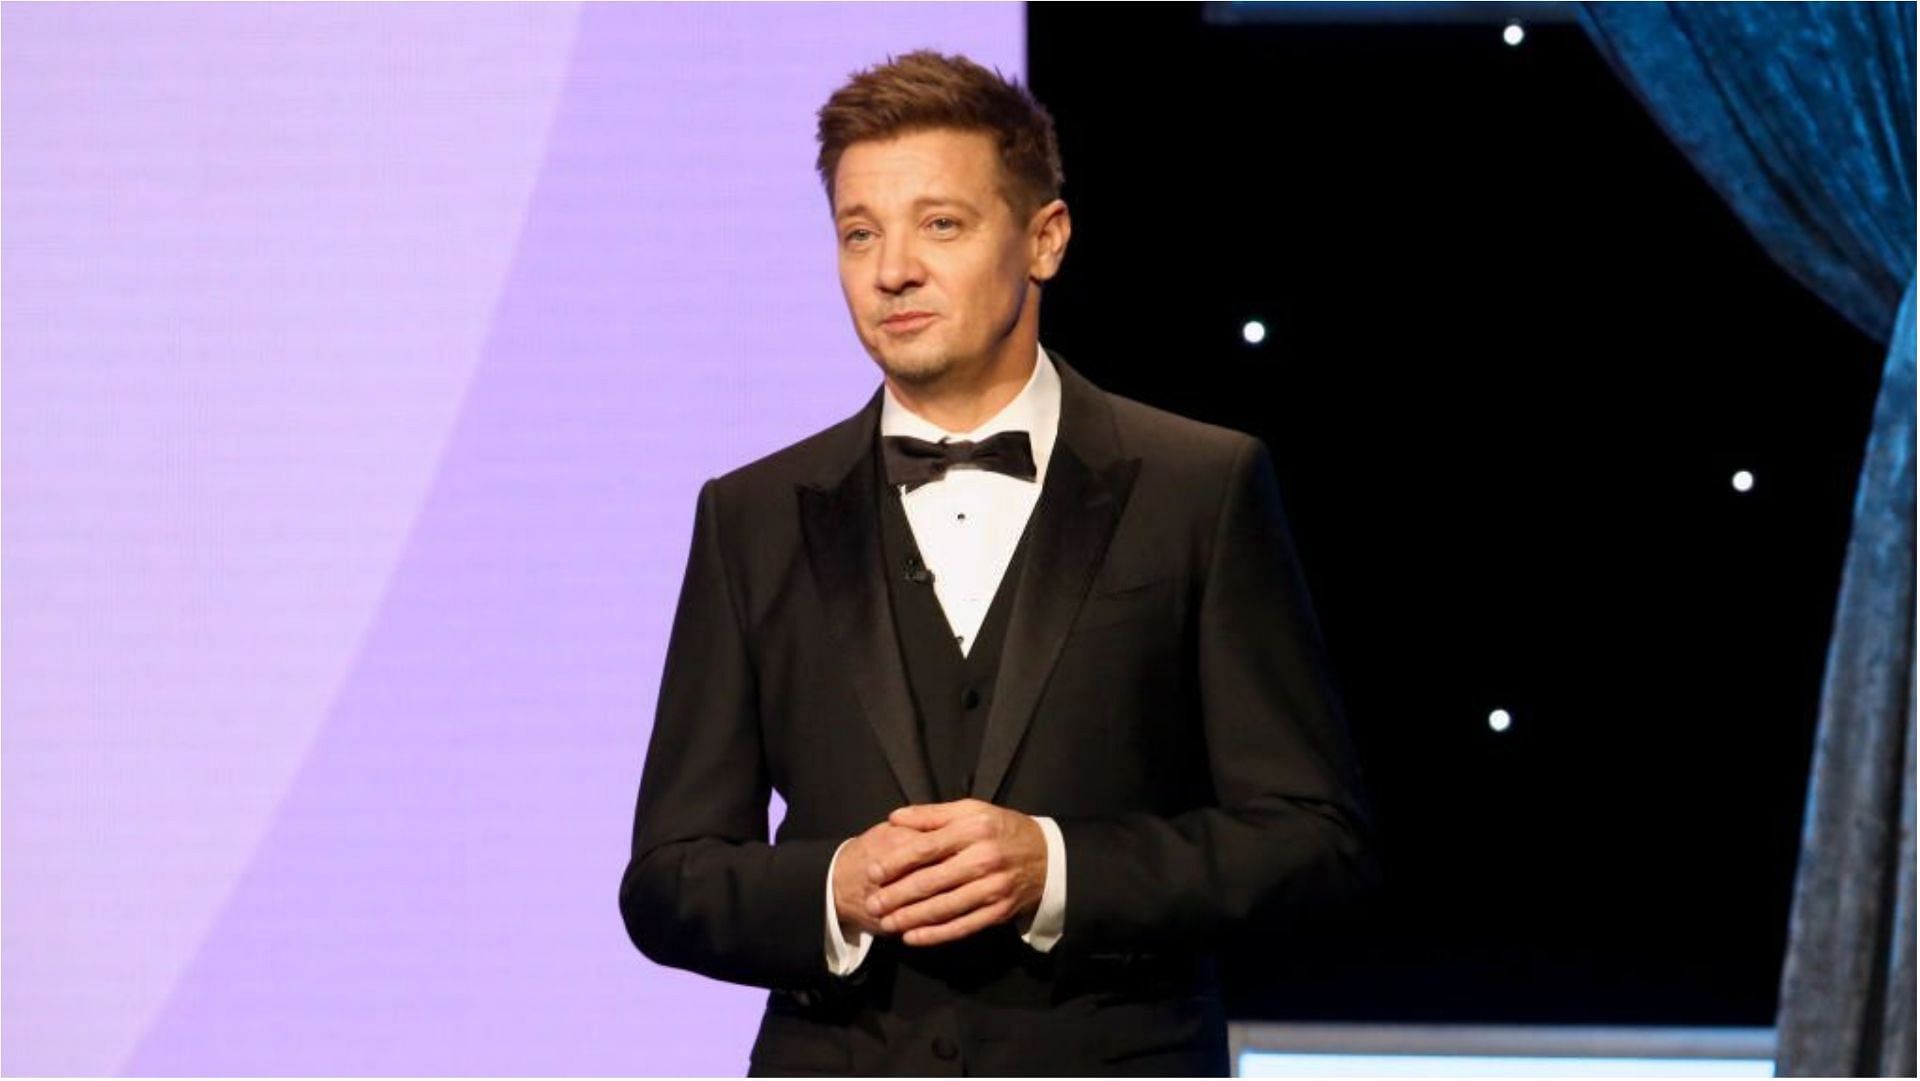 Jeremy Renner updated his fans about his recovery following the accident (Image via Tommaso Boddi/Getty Images)